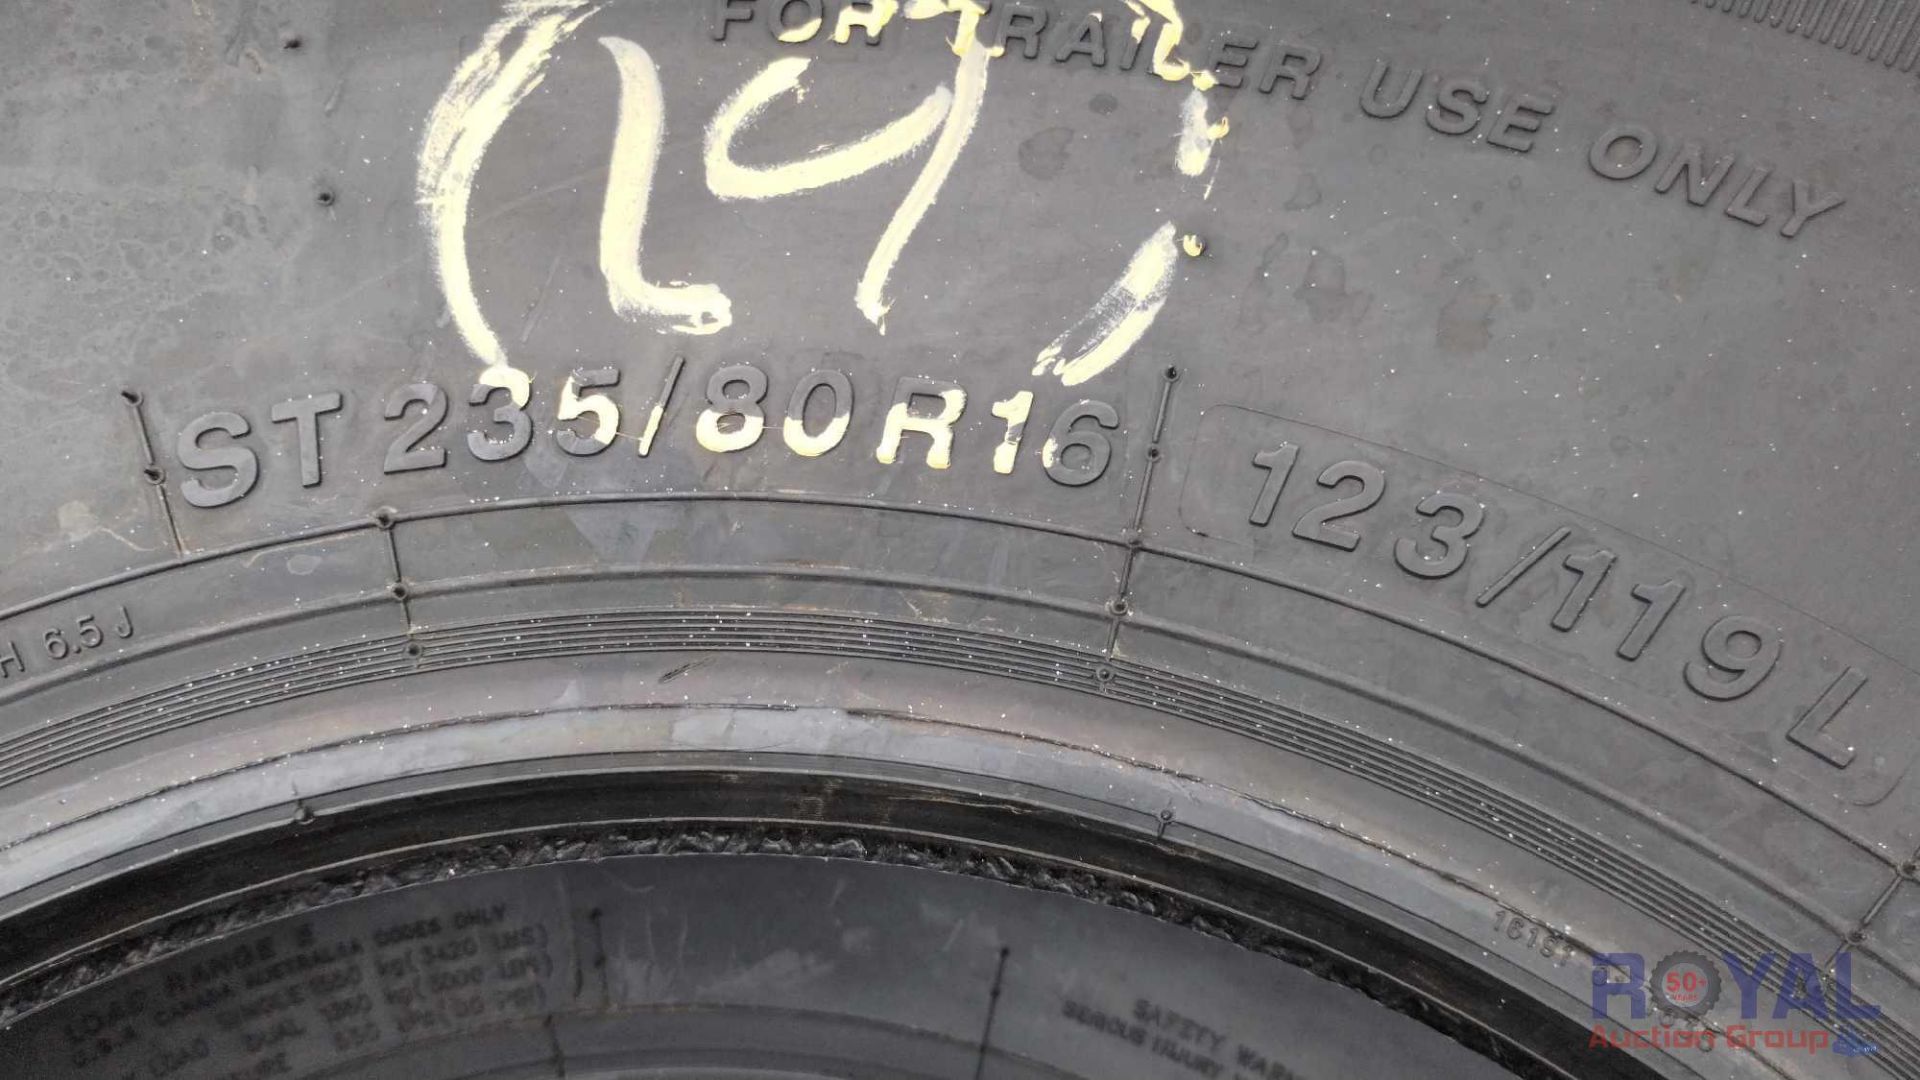 235/80/16 Tires - Image 5 of 6